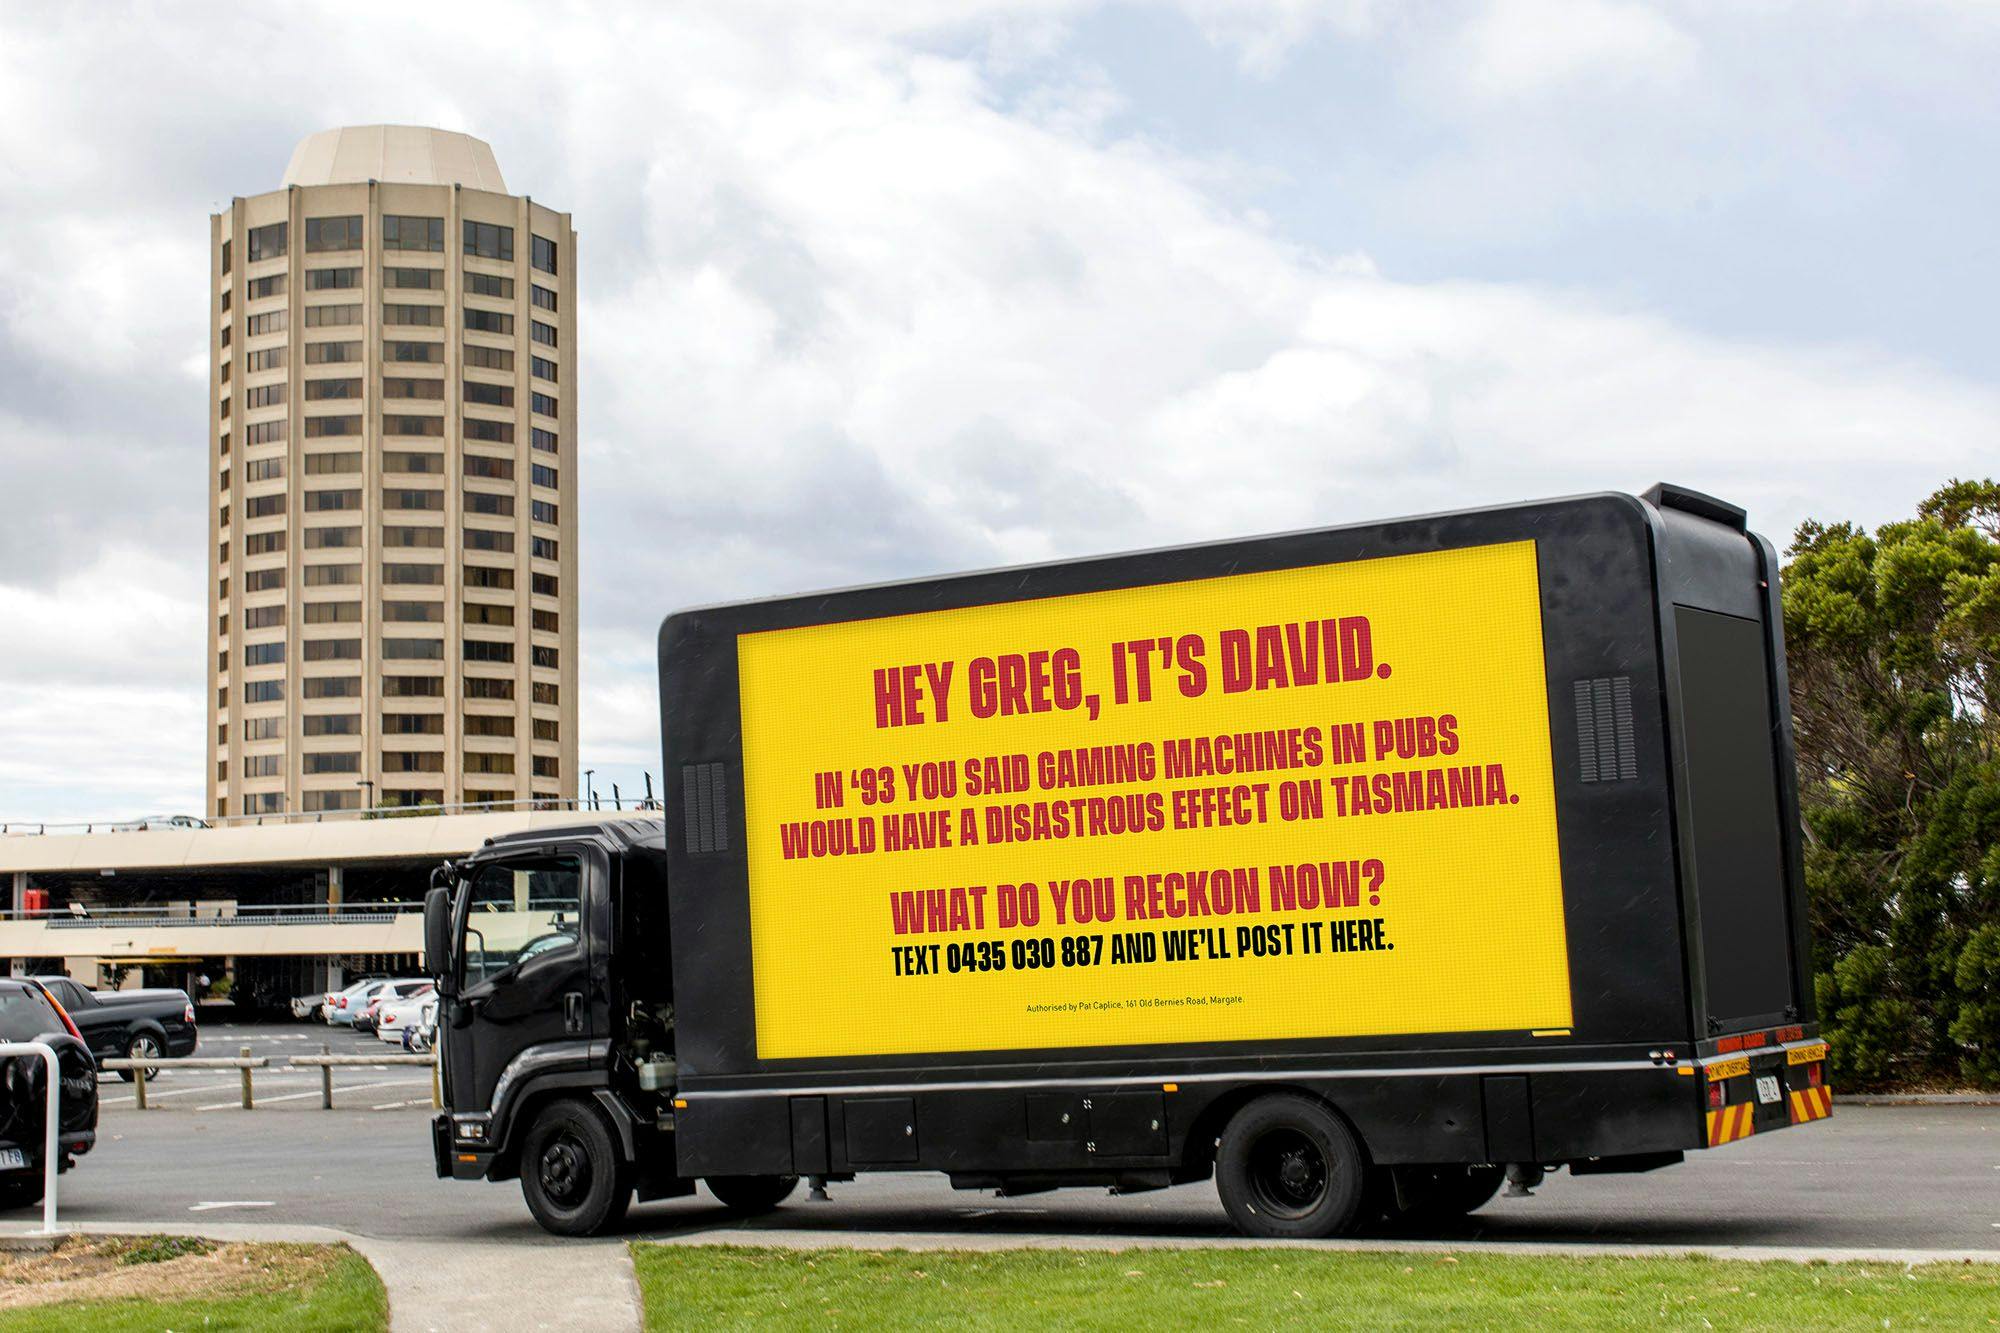 Truck outside Wrest Point Casino with a message from David to Greg